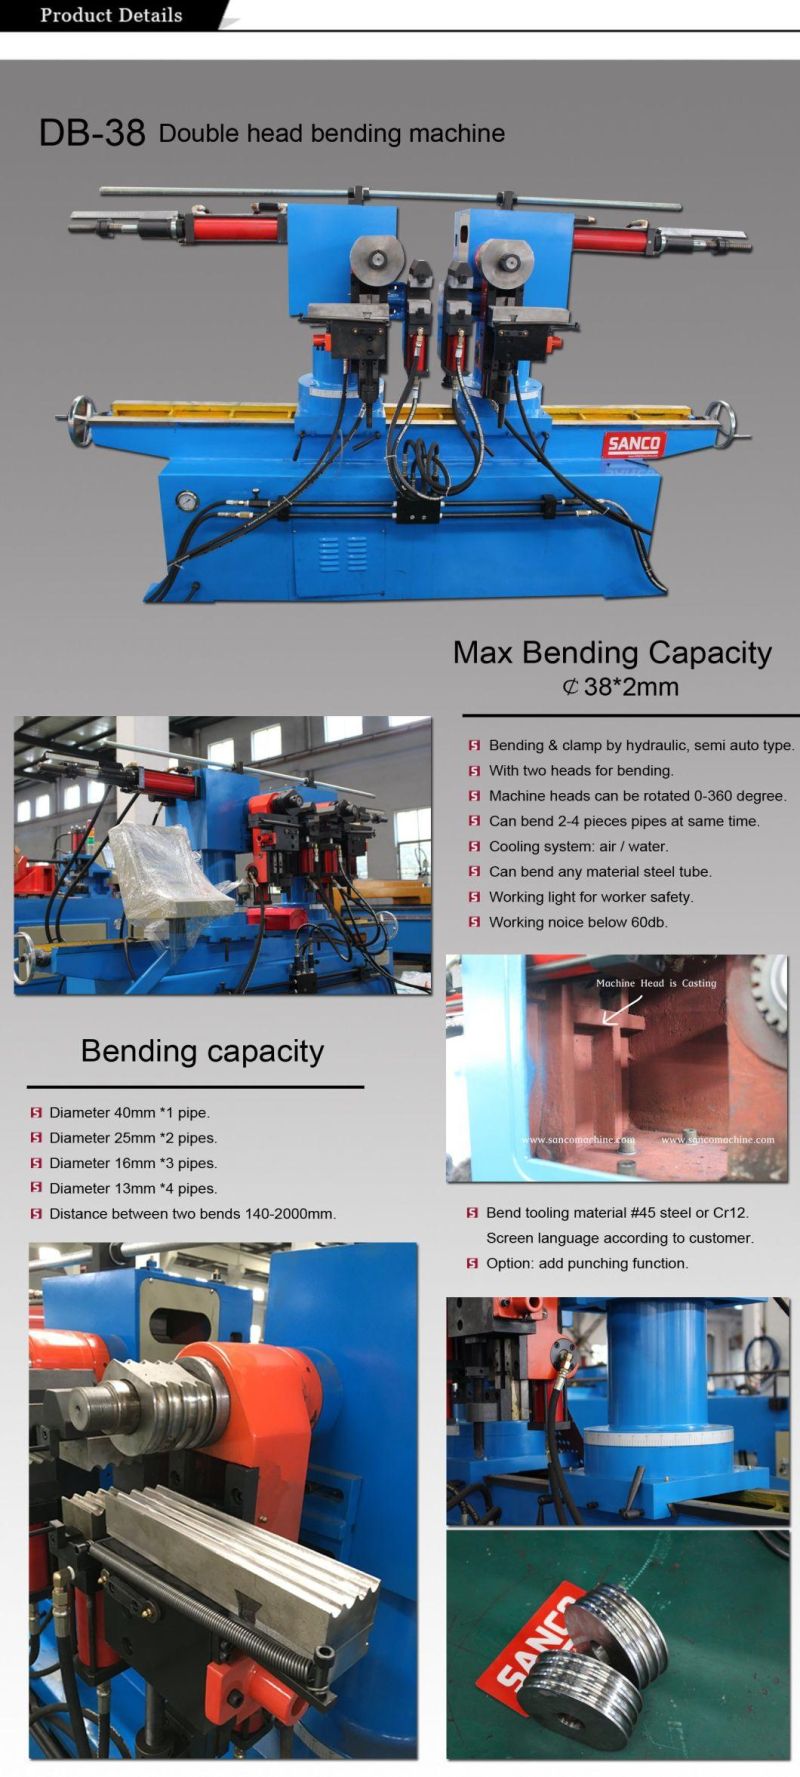 Bed Bending Machine for Furniture Industry